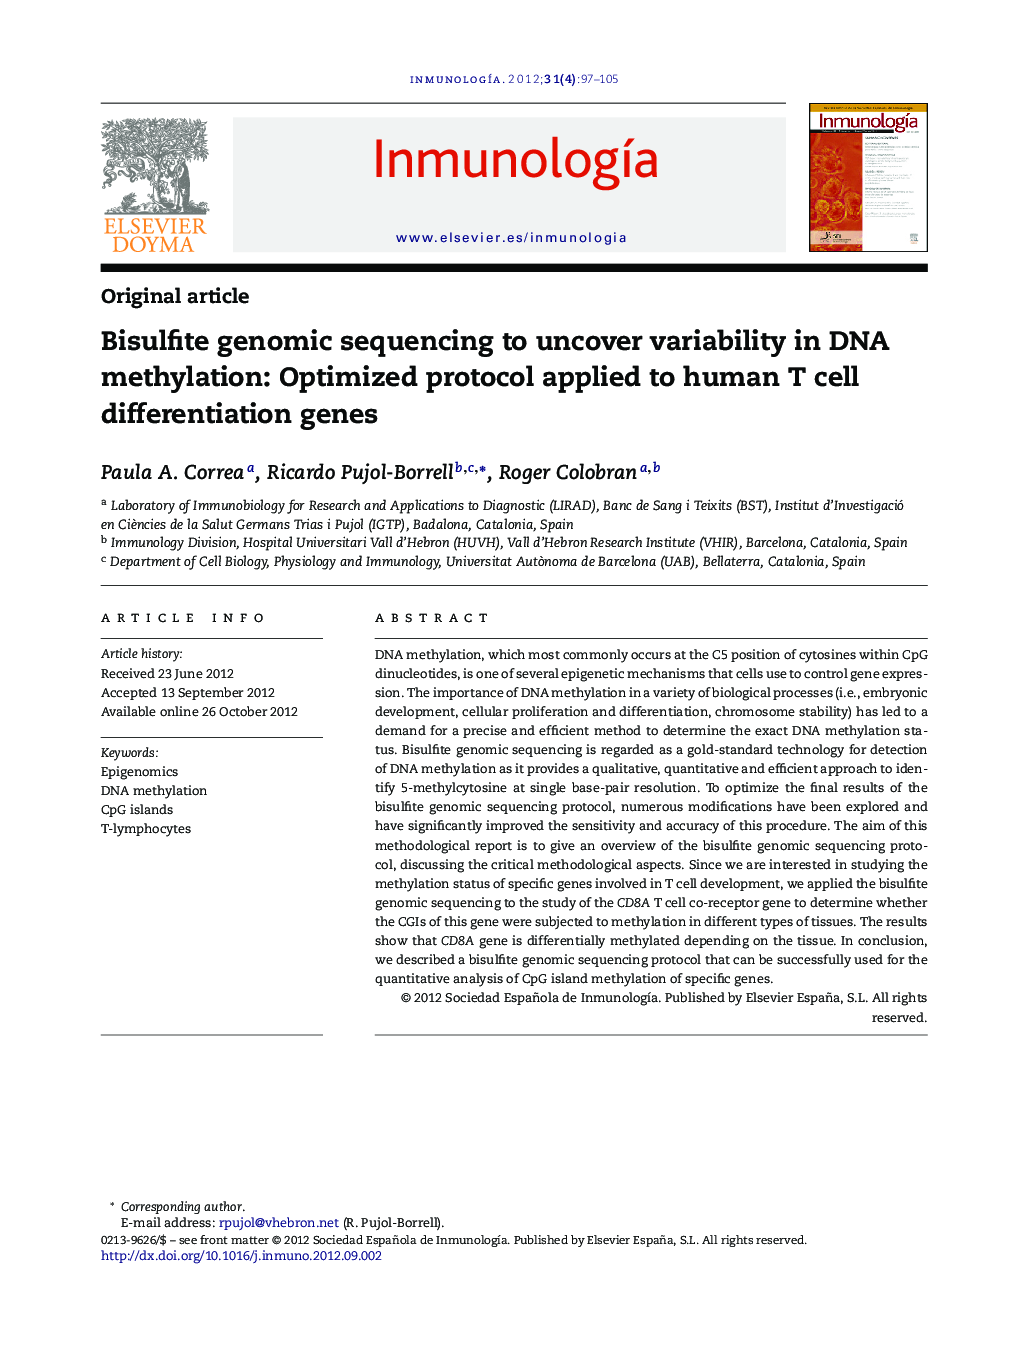 Bisulfite genomic sequencing to uncover variability in DNA methylation: Optimized protocol applied to human T cell differentiation genes